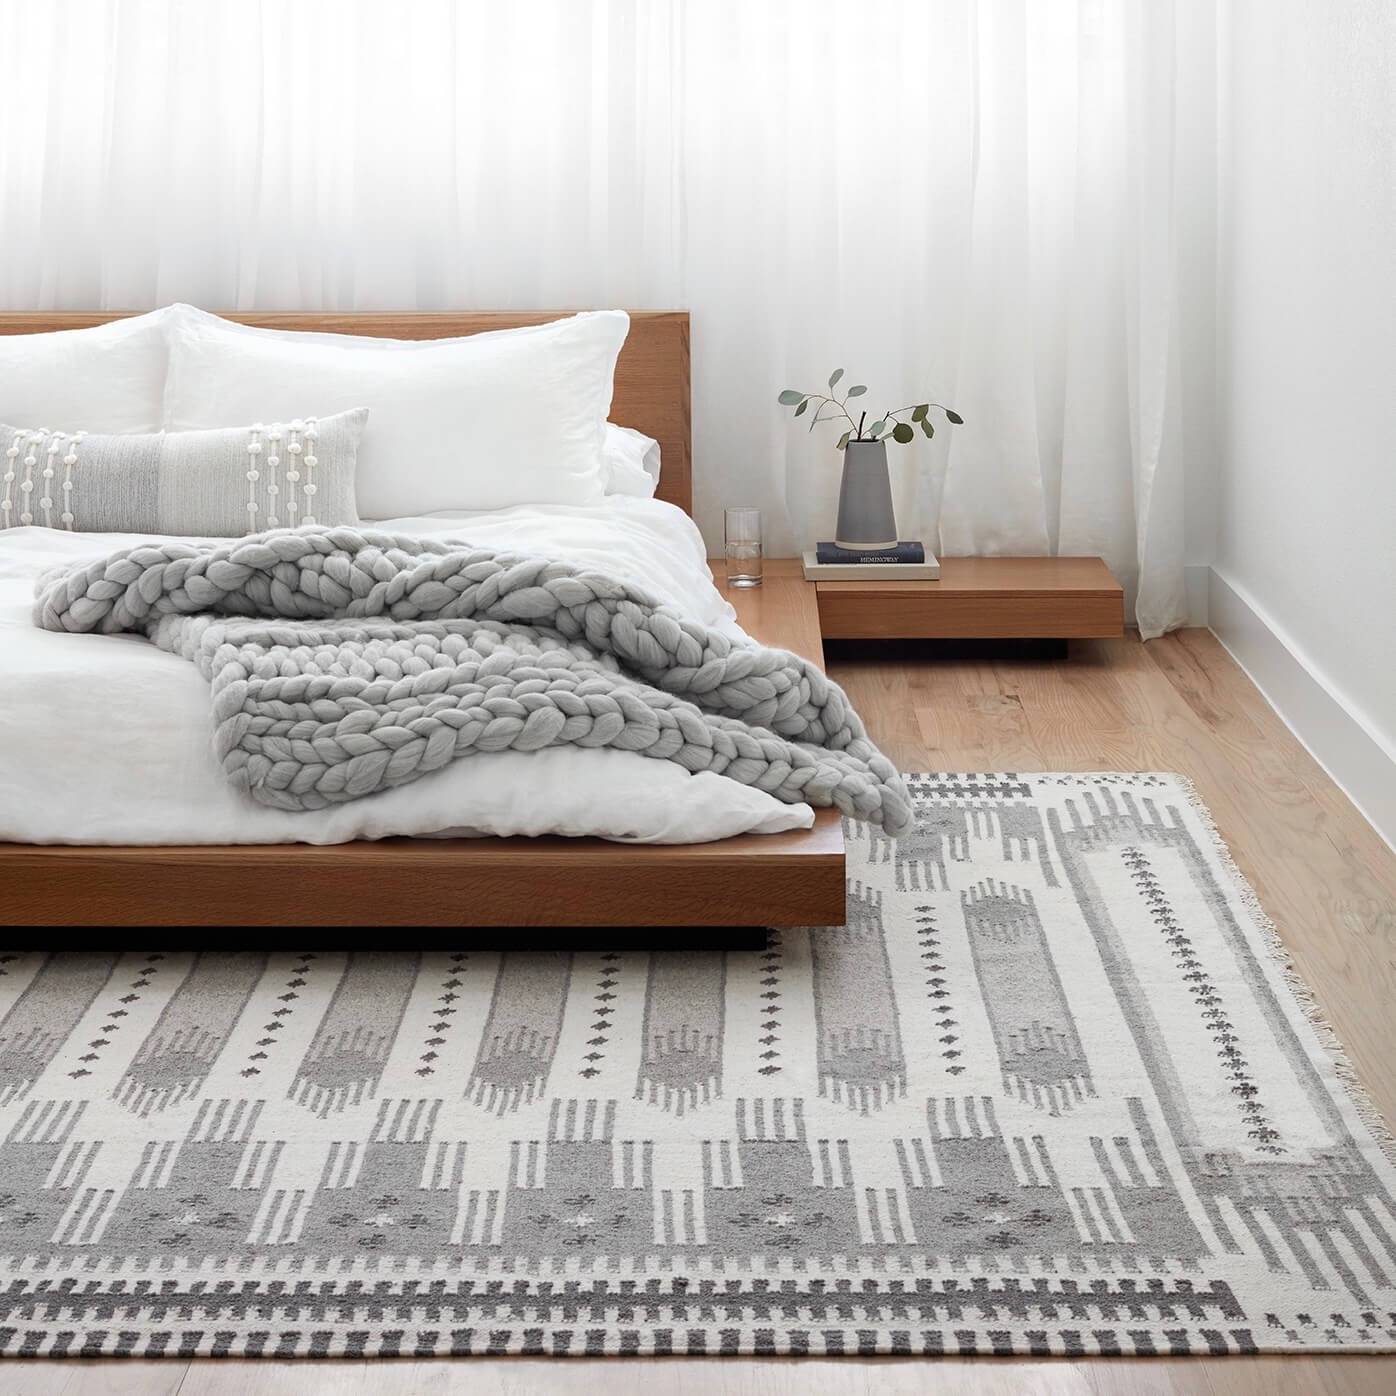 The Citizenry Asha Handwoven Area Rug | 9' x 12' | Grey - Image 2